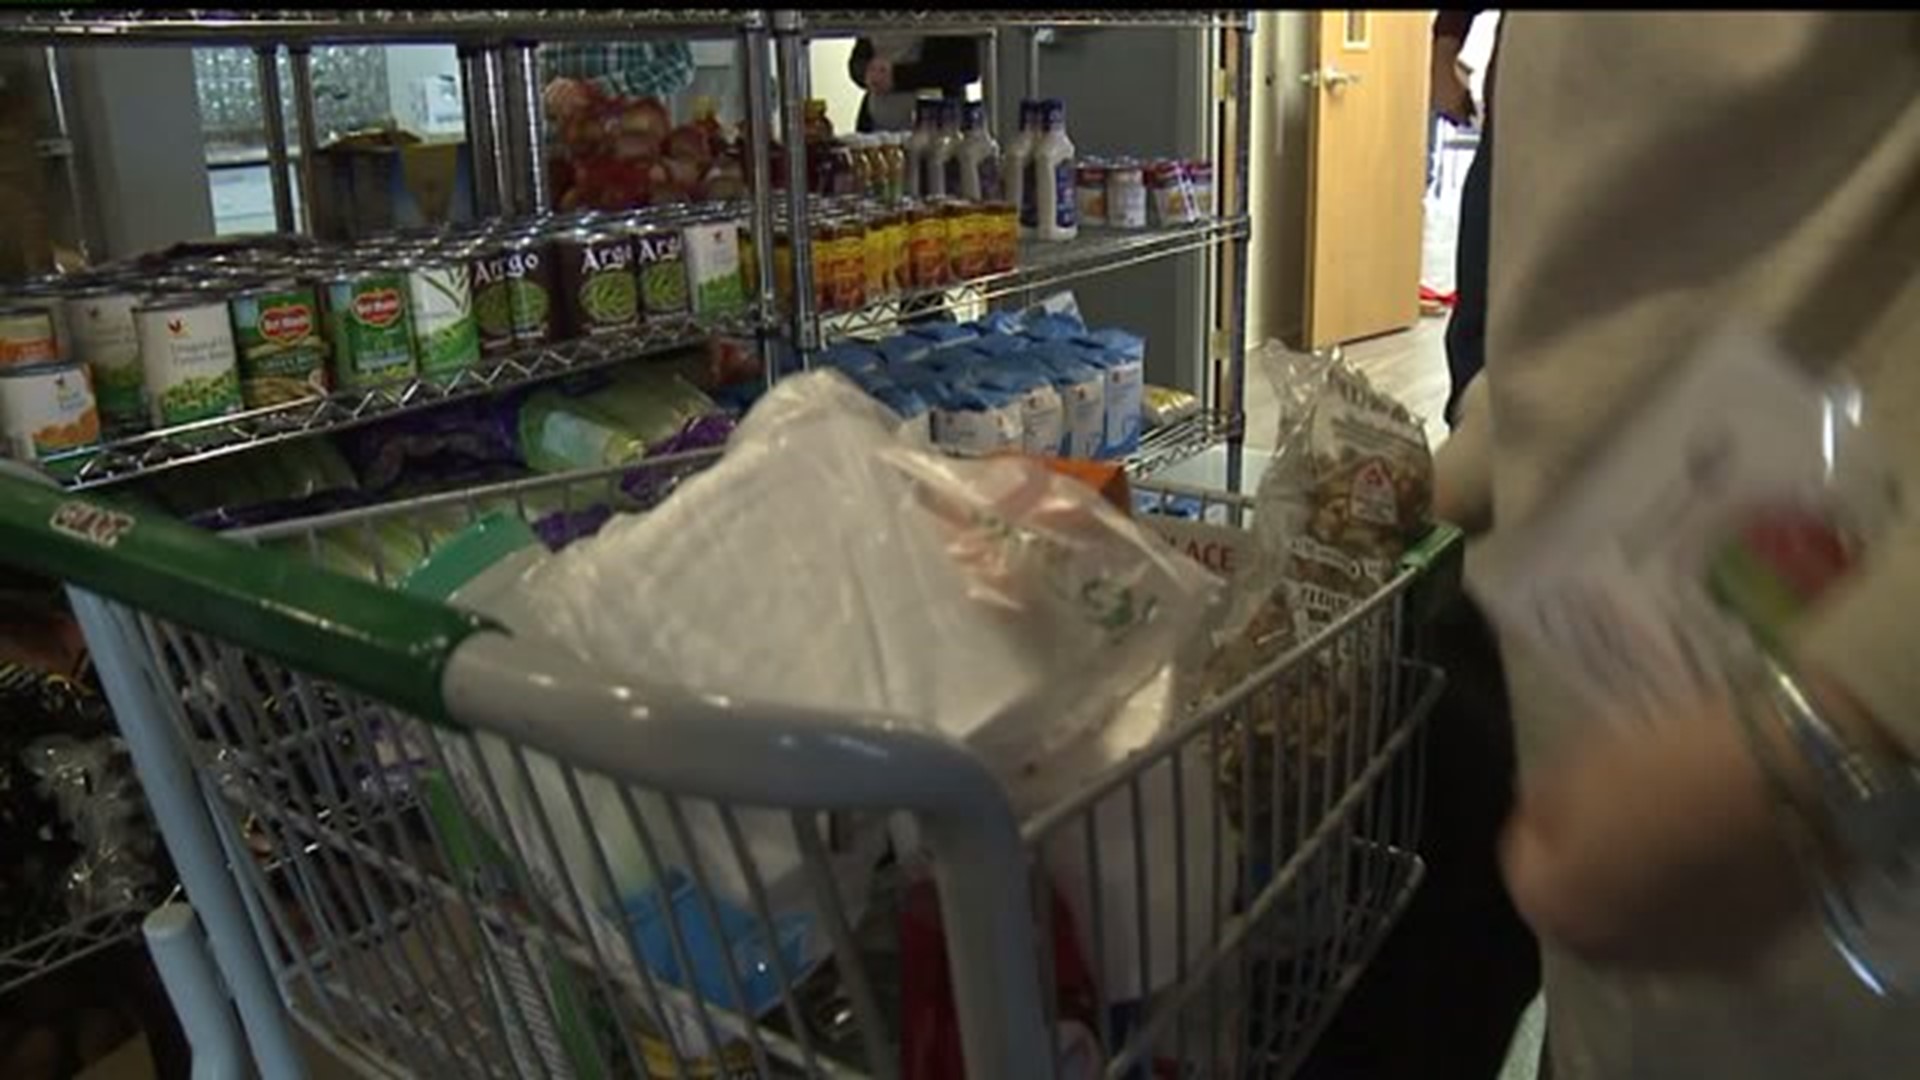 Ministry provides food for hundreds of families in need this Thanksgiving